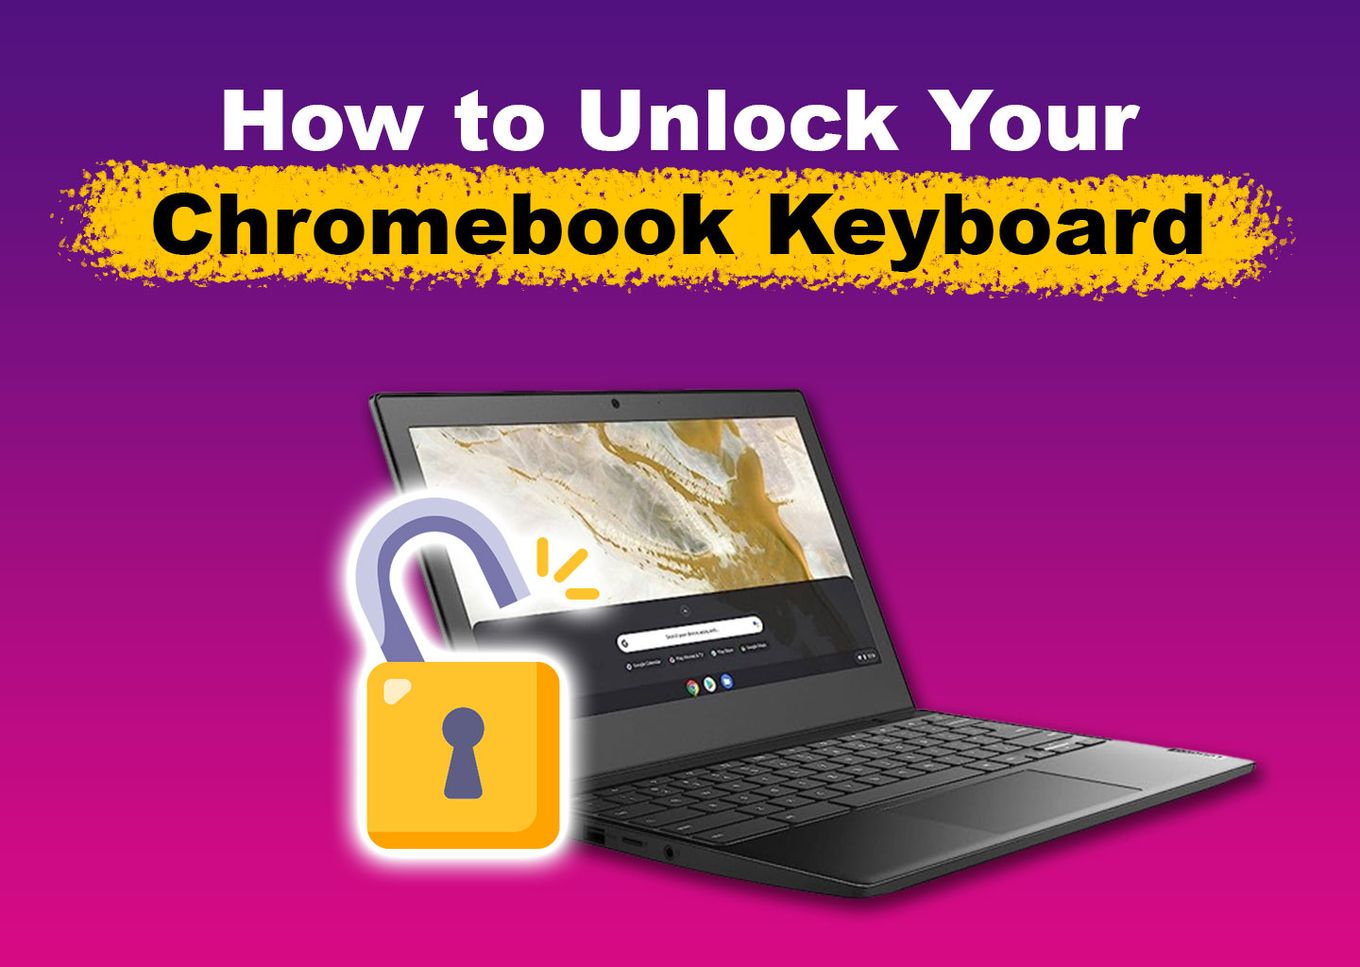 How to Invert Colors on Chromebook: 2 Easy Methods